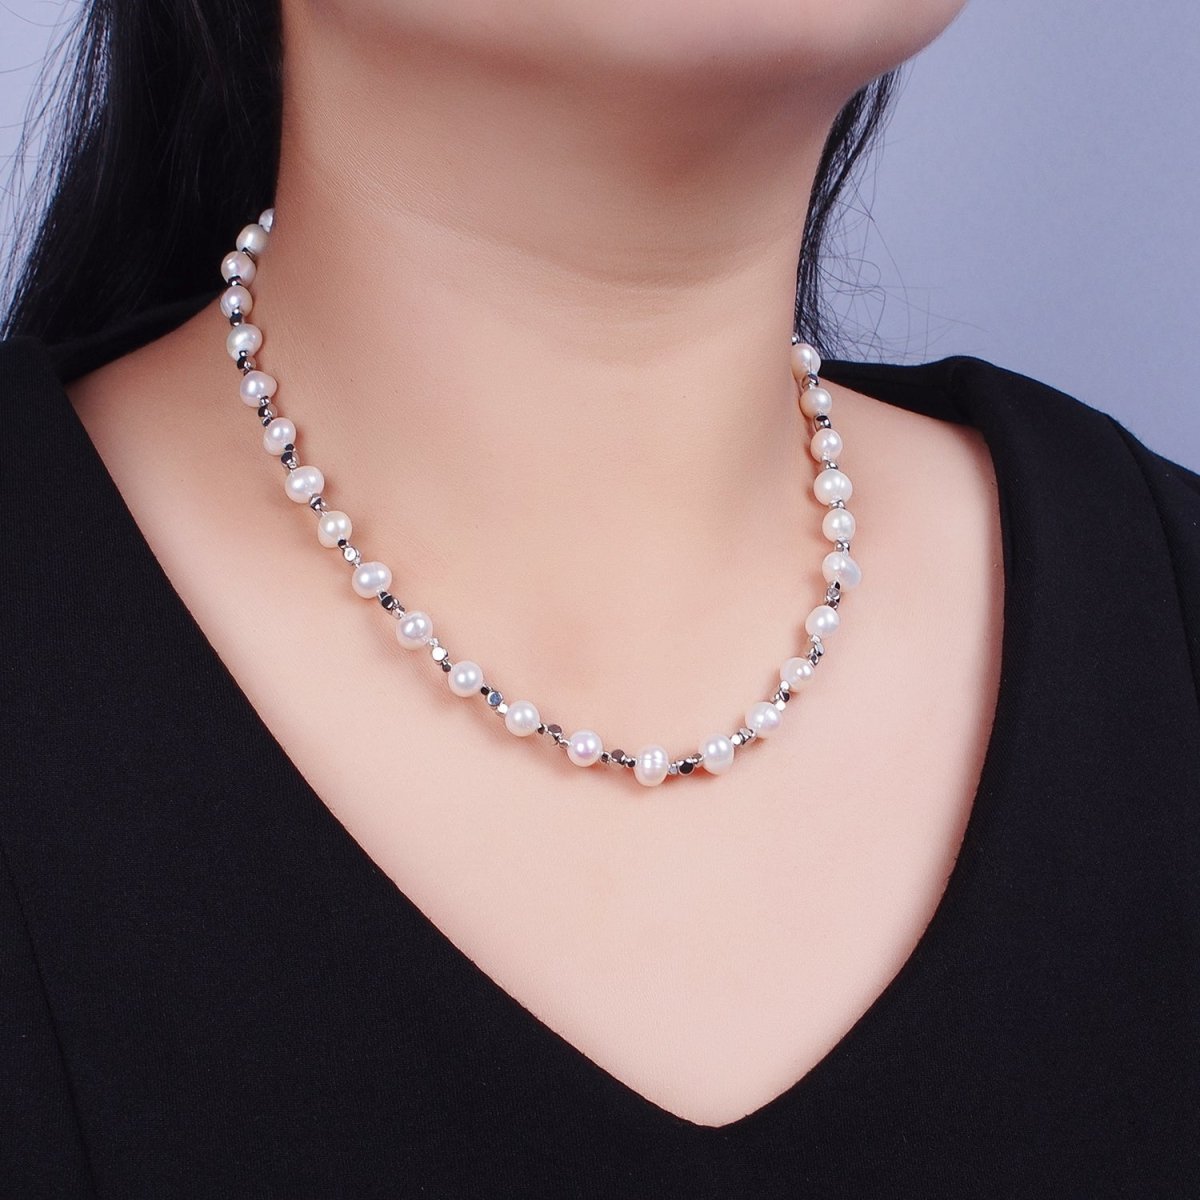 White Shell Pearl Silver Cube Spacer Beads 15.75 Inch Necklace | WA-1421 Clearance Pricing - DLUXCA